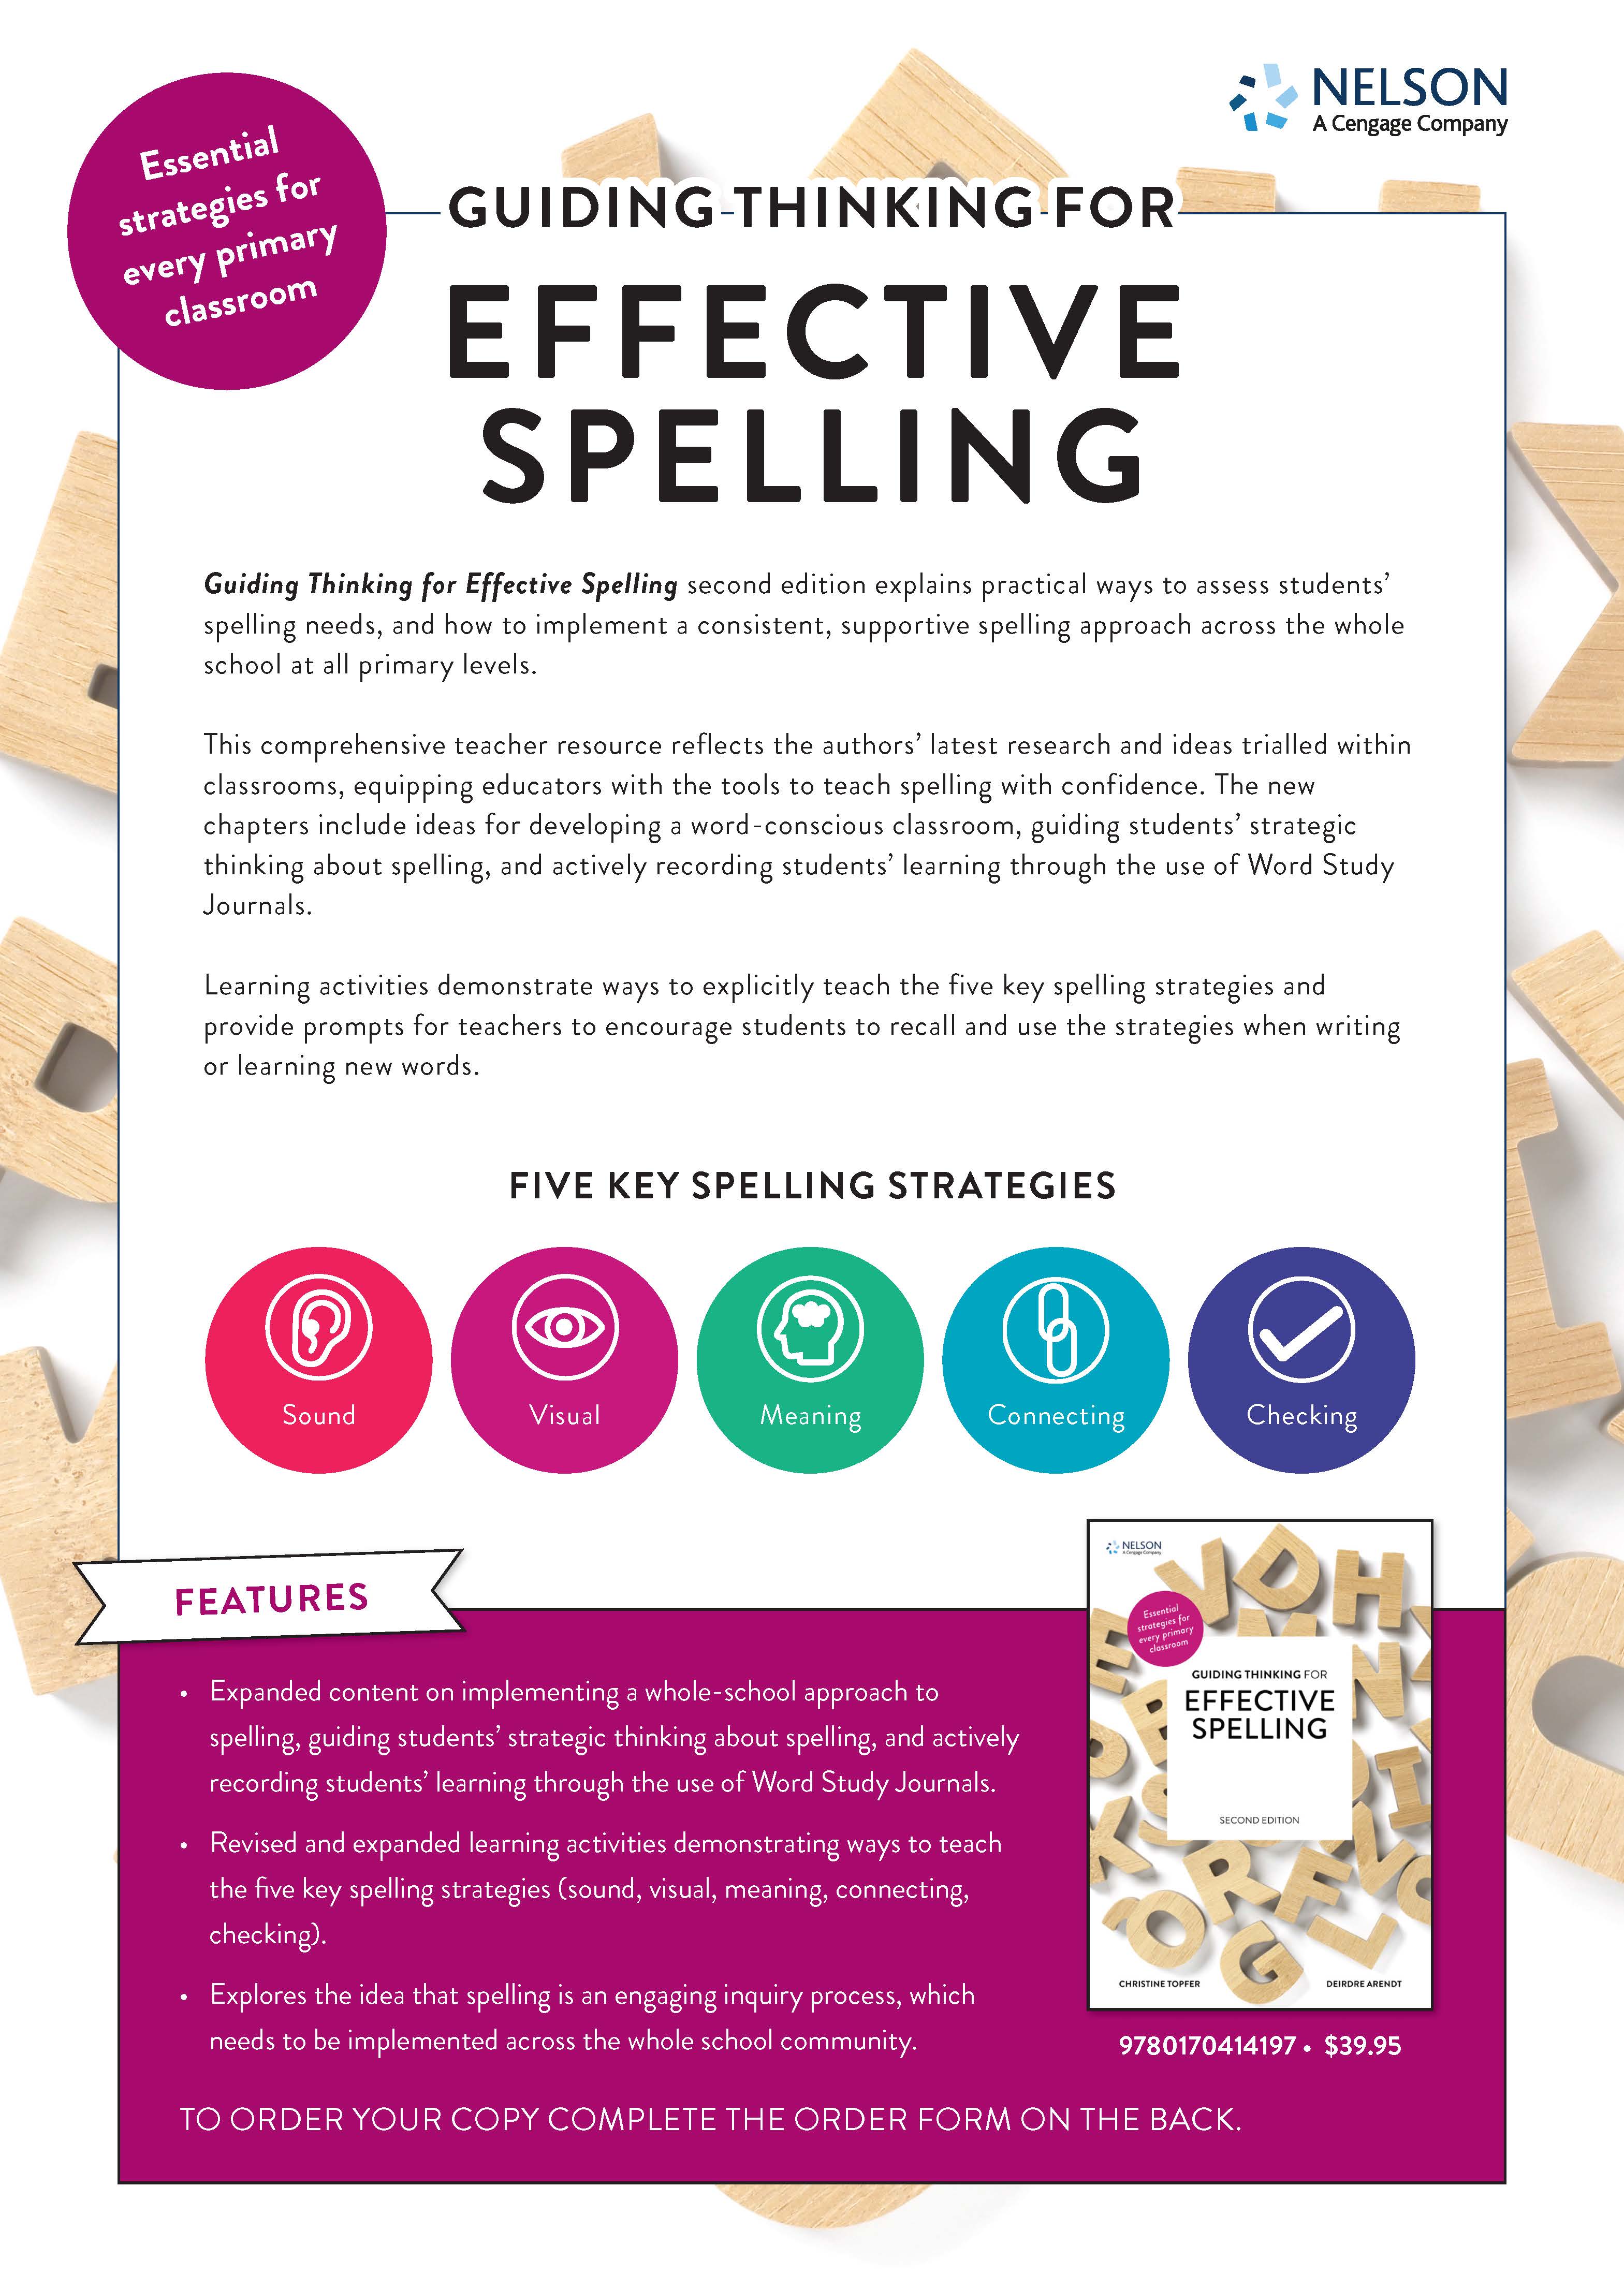 Guiding Thinking for Effective Spelling flyer